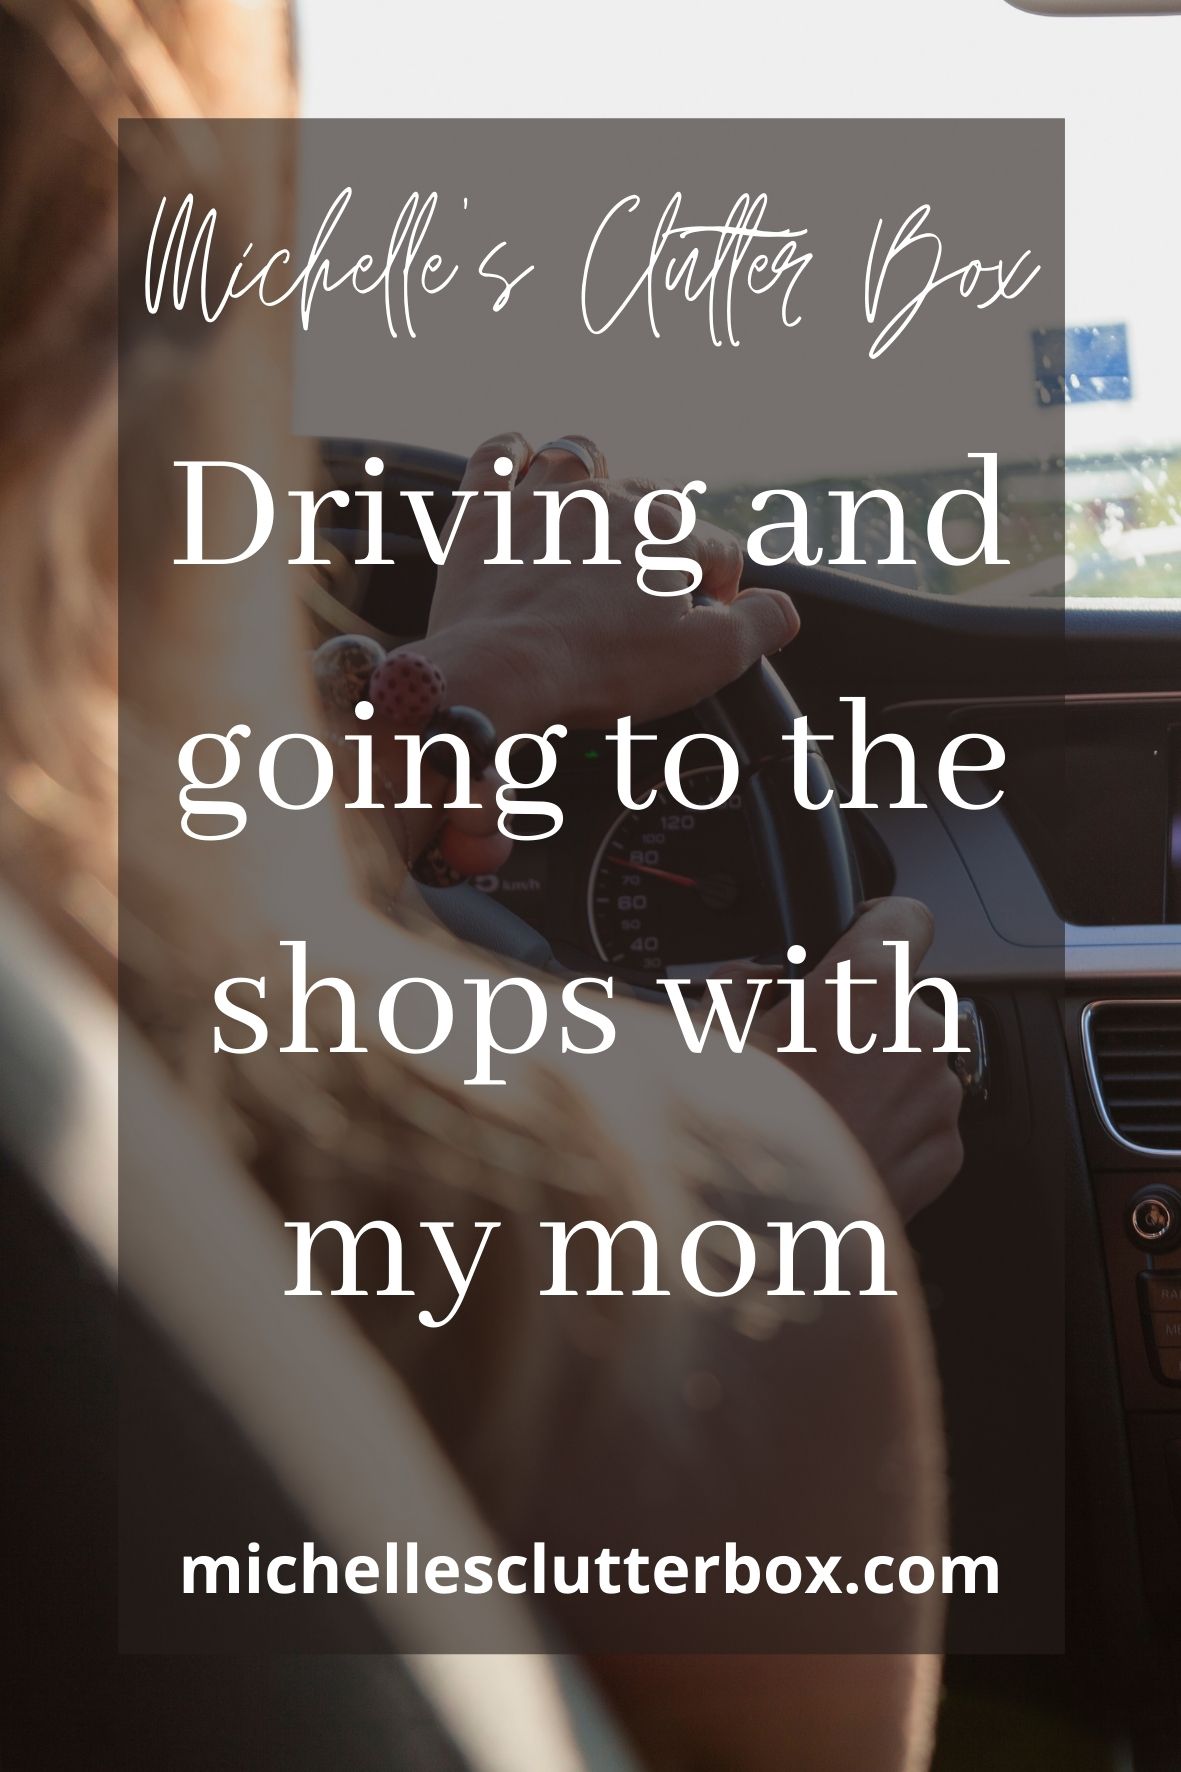 Driving and going to the shops with my mom